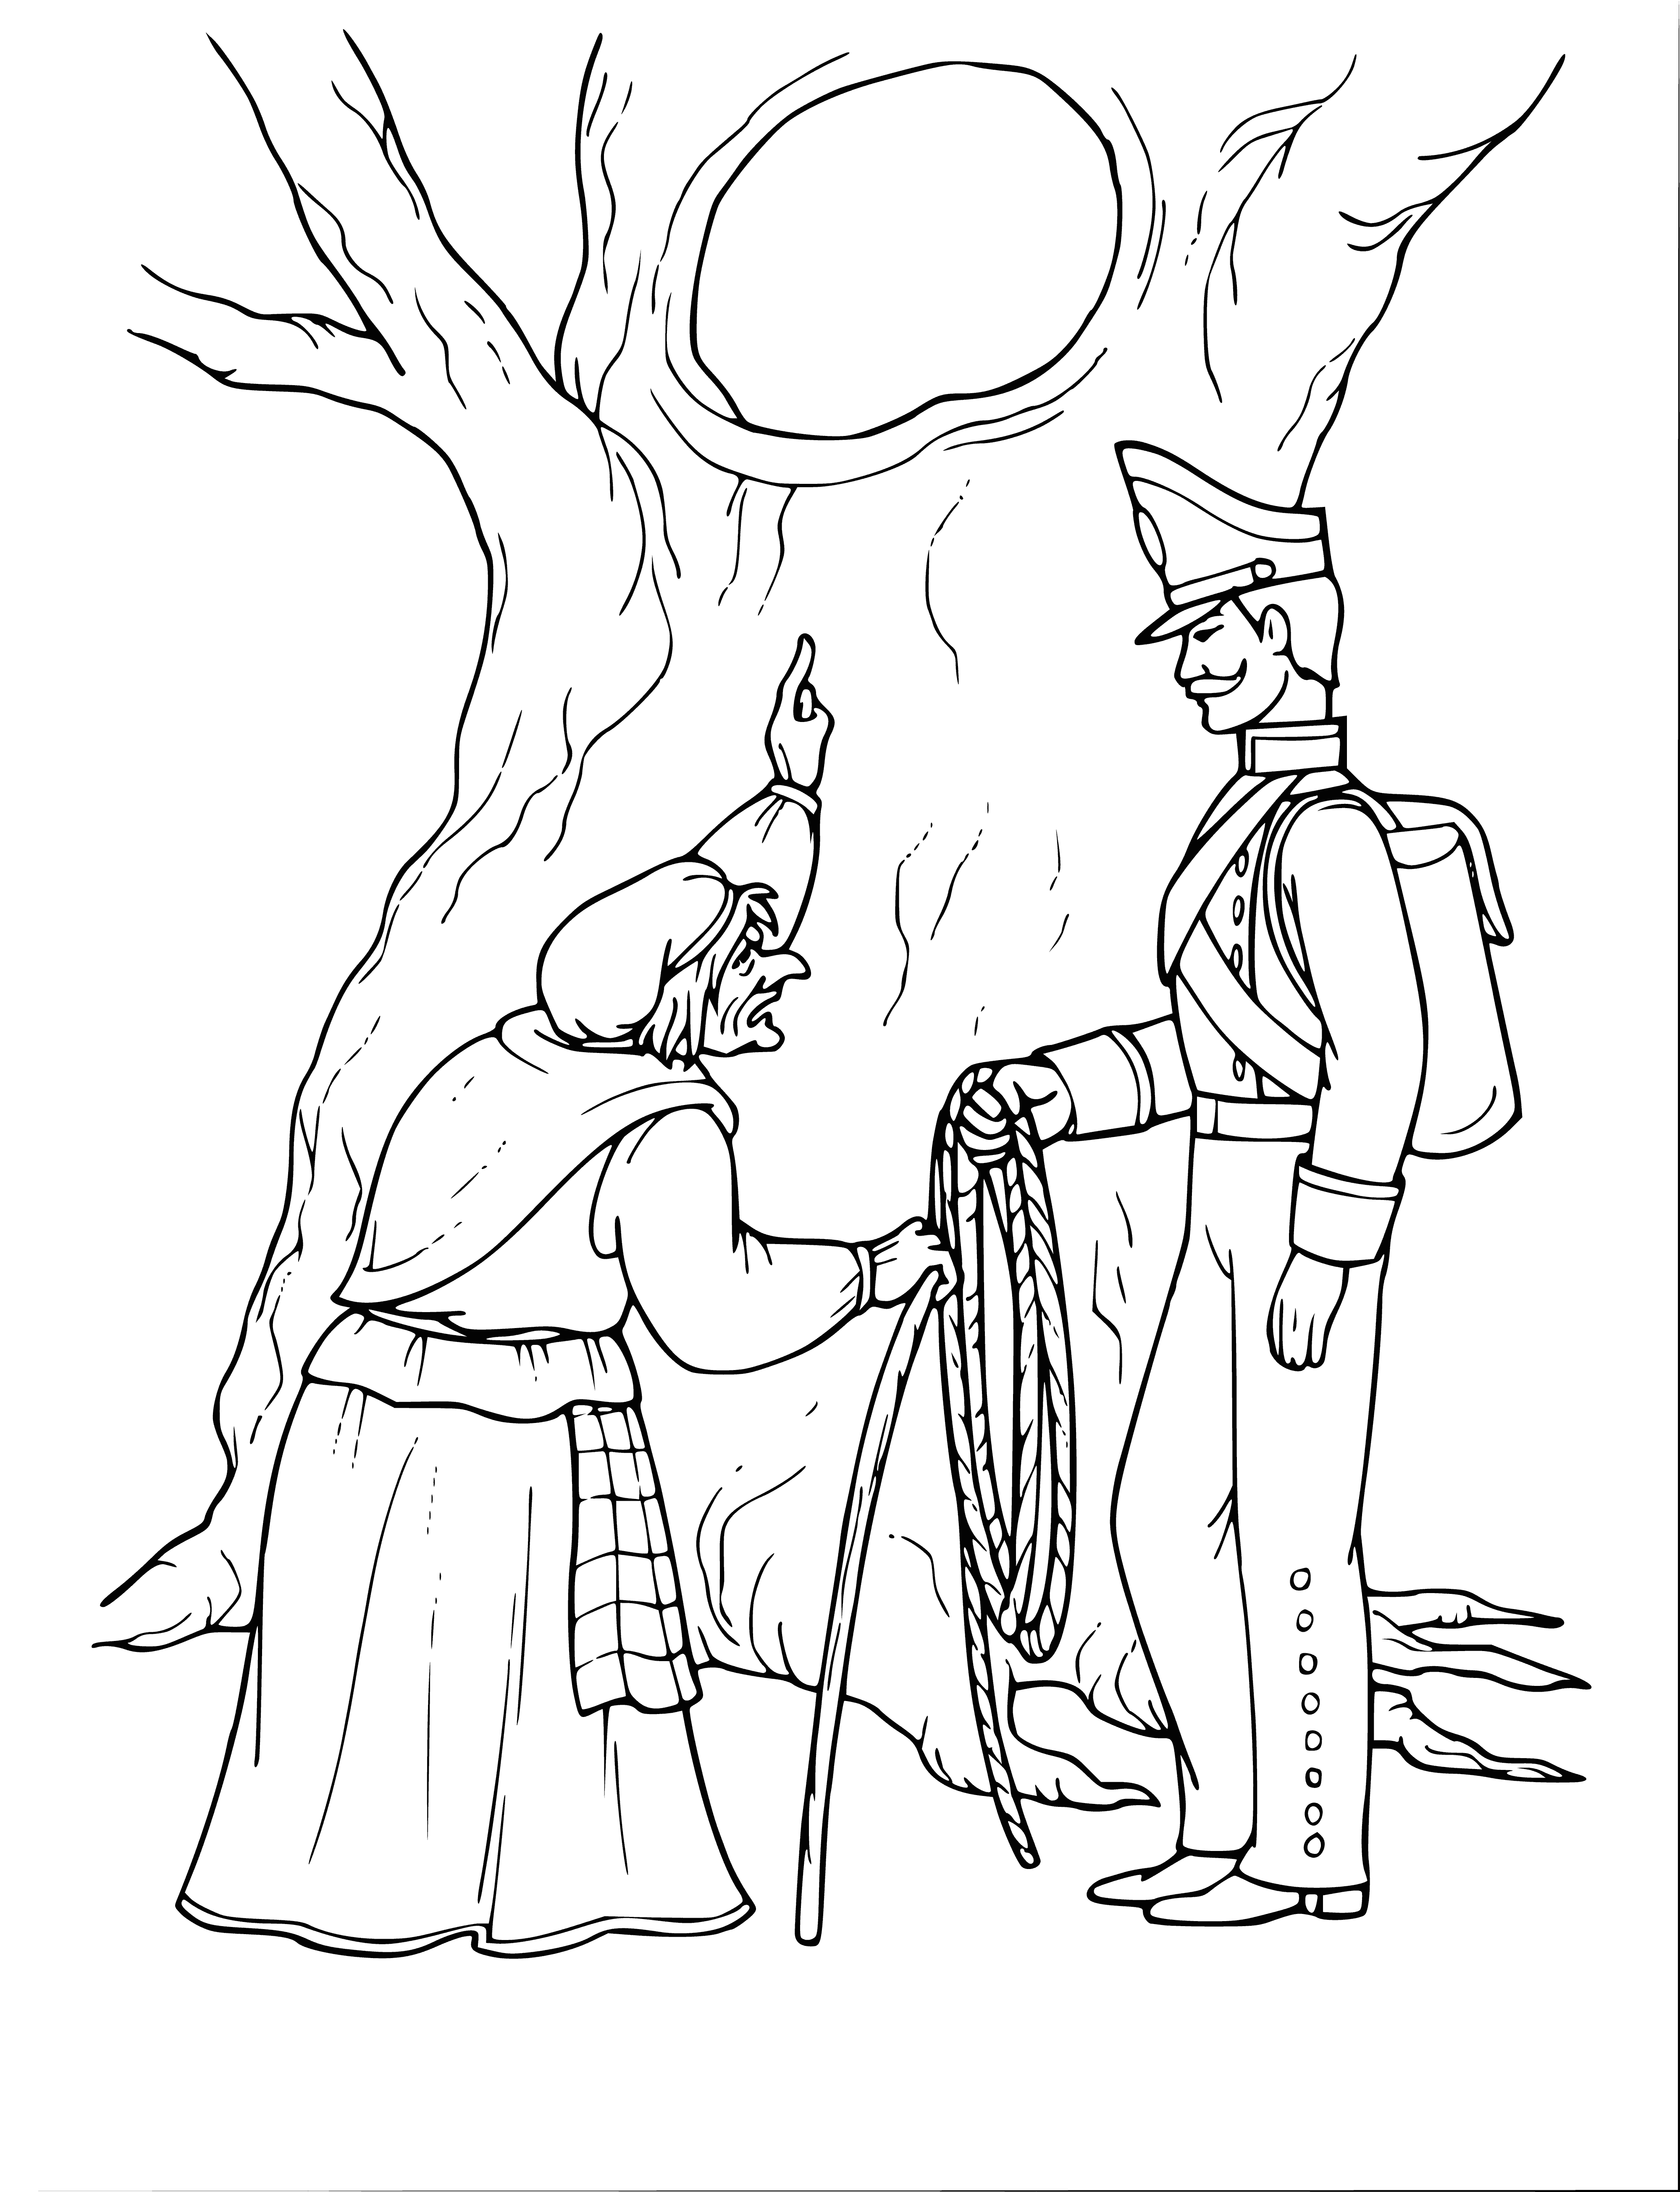 Soldier and witch coloring page